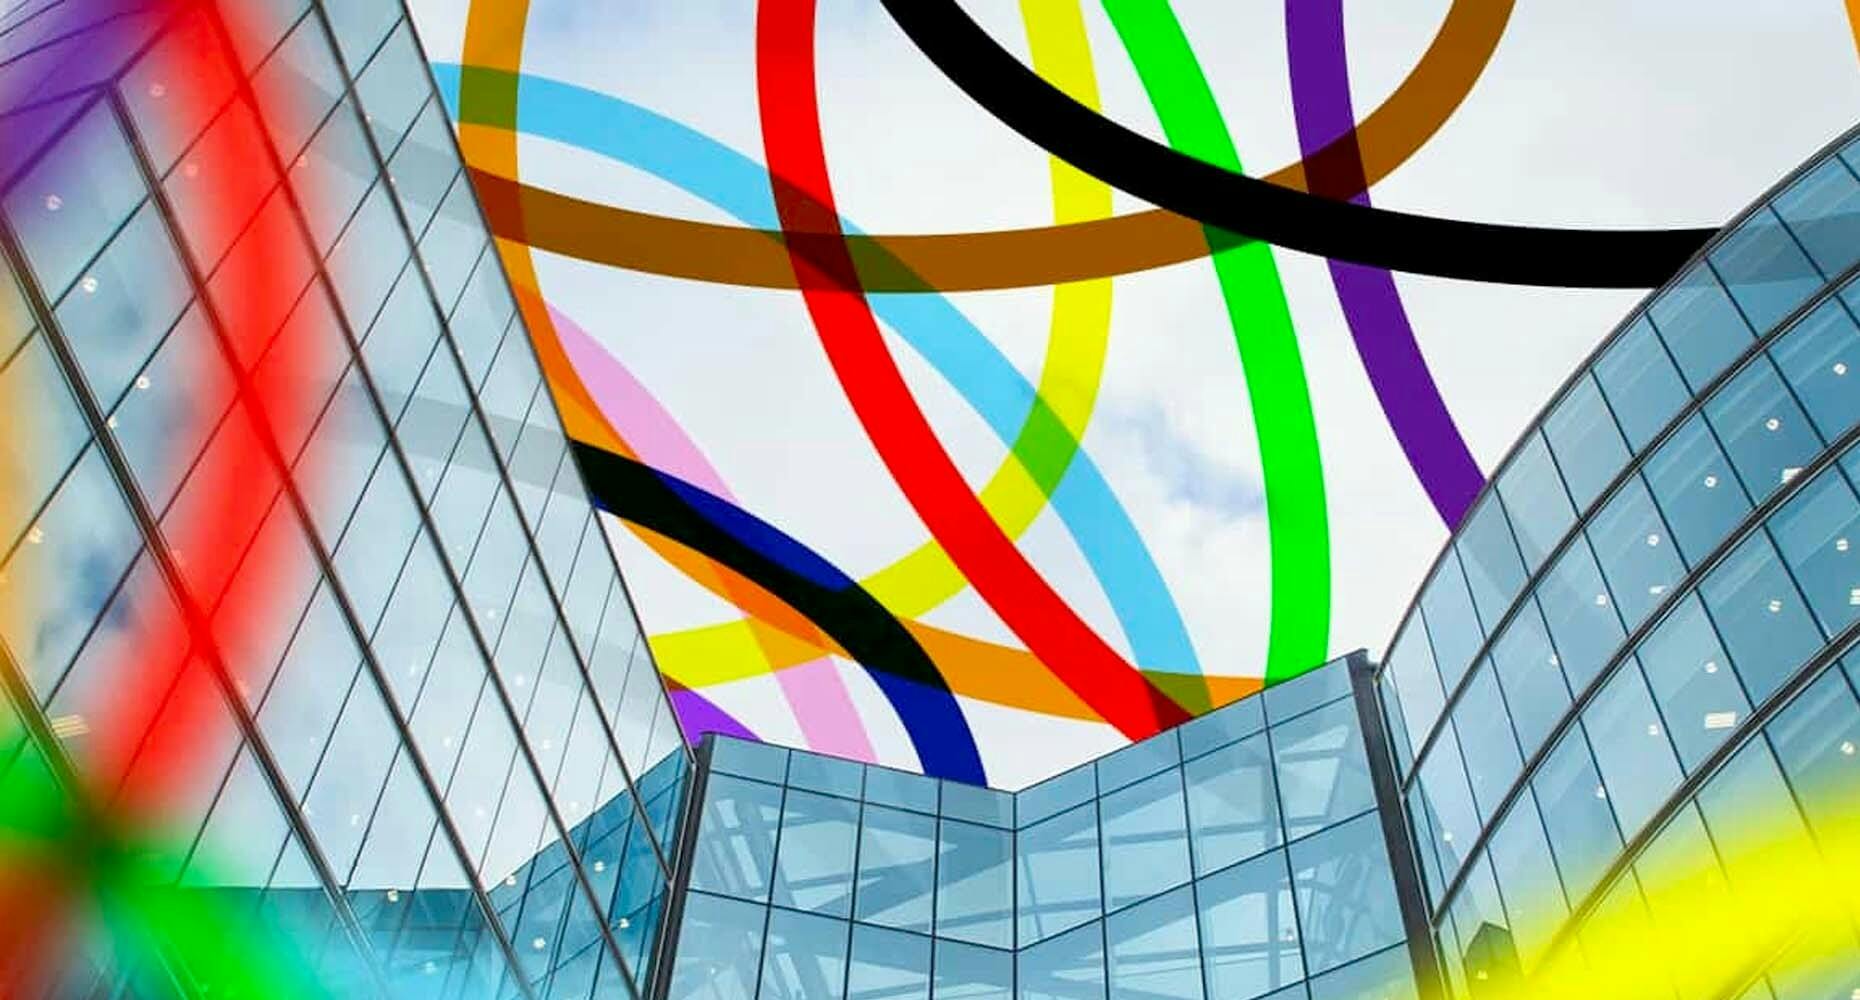 A vibrant rainbow arching over a modern glass building, symbolizing hope and positivity.